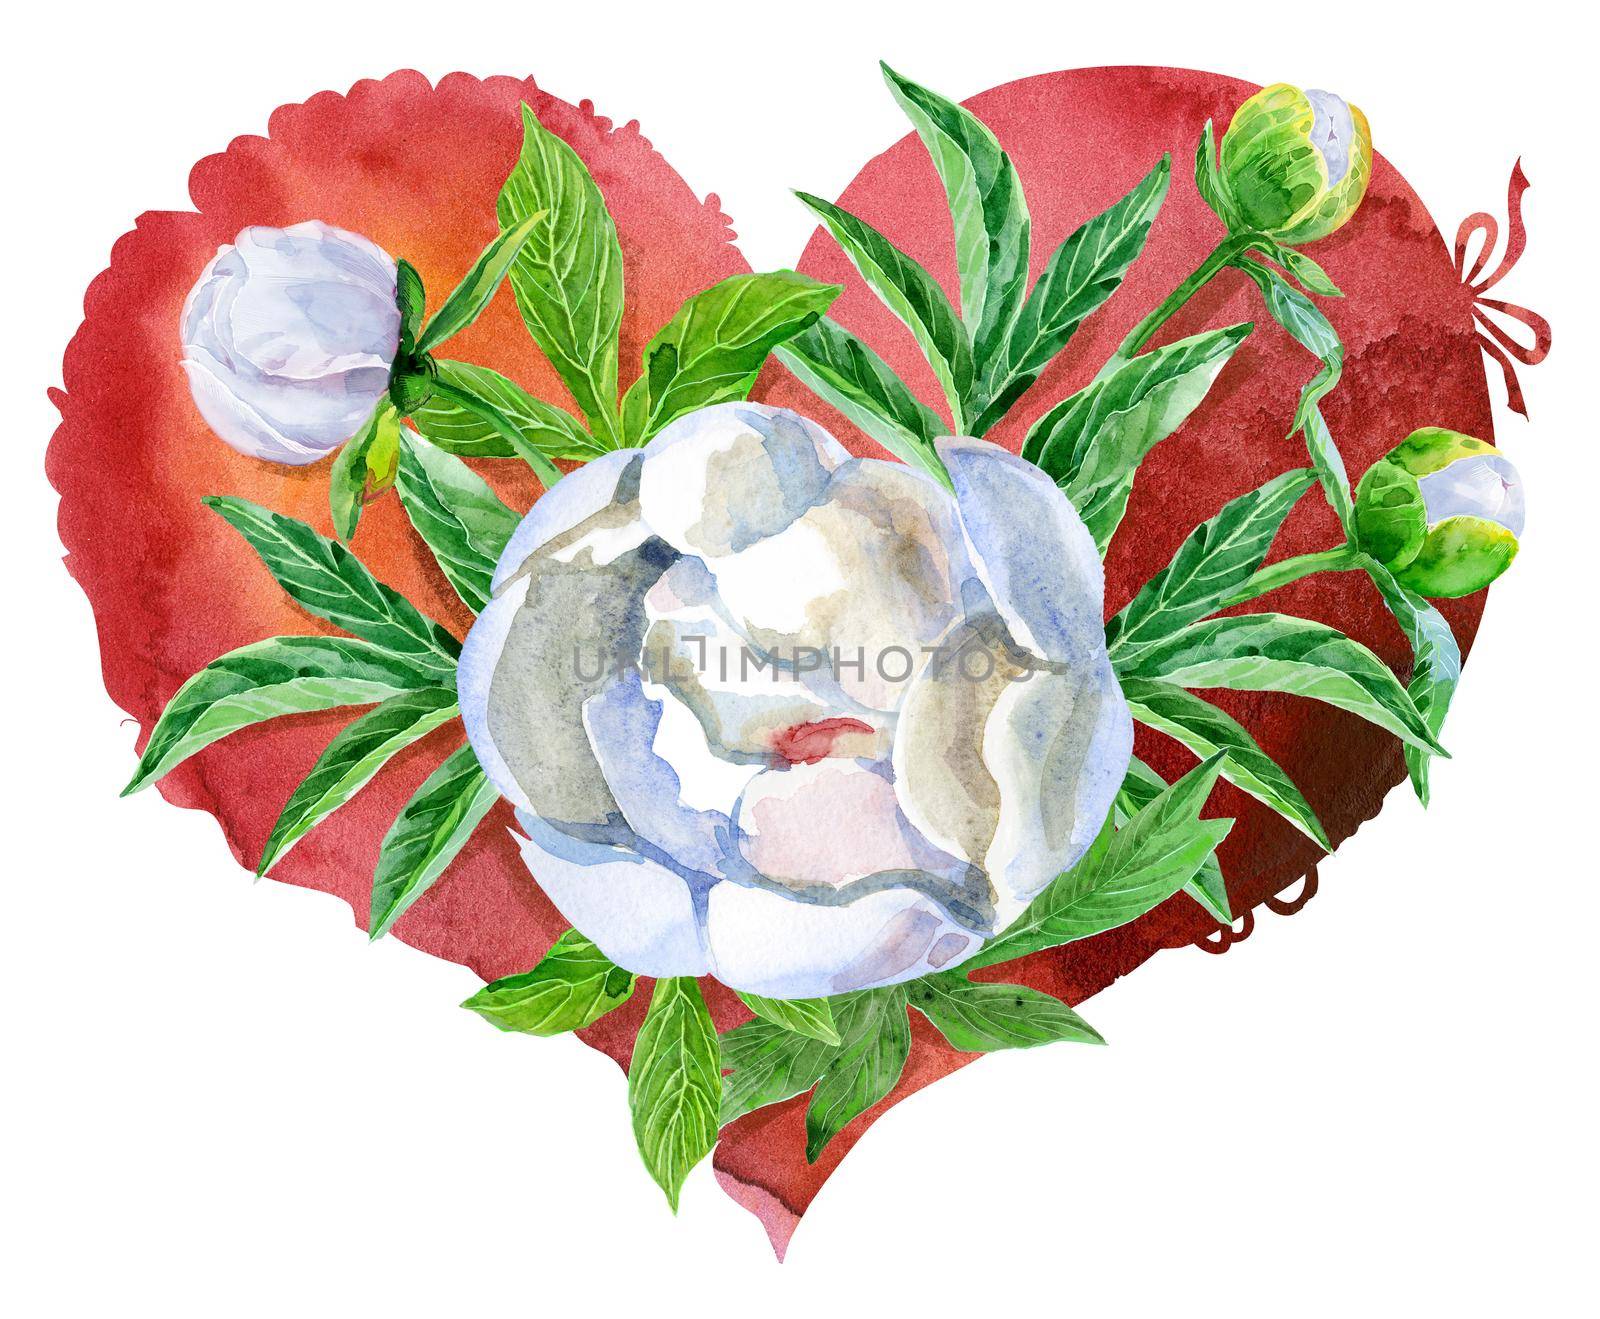 watercolor red heart with white peonies by NataOmsk